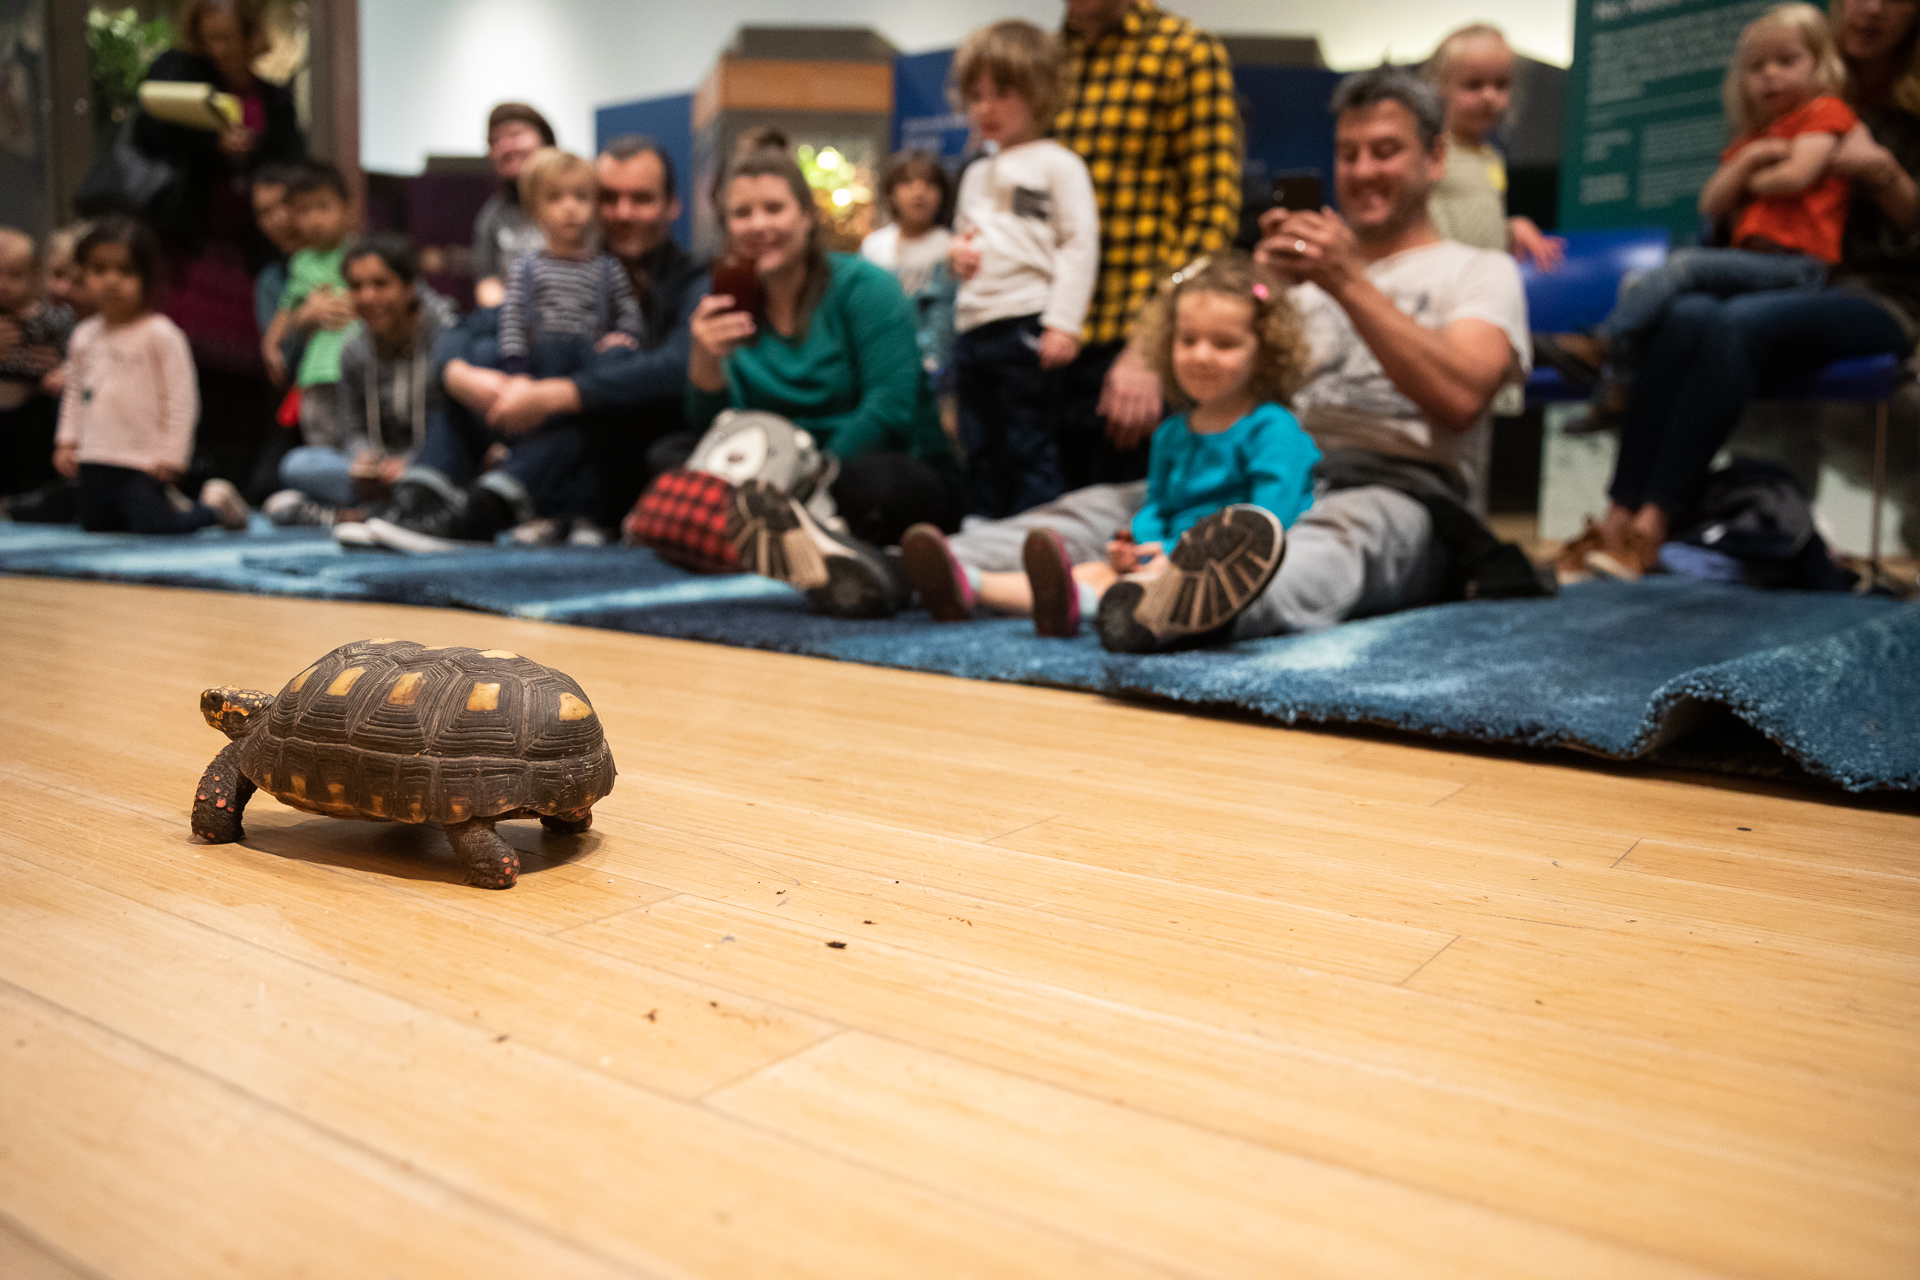 Flash the tortoise struts his stuff at the Brooklyn Children’s Museum. Eagle photo by Paul Frangipane